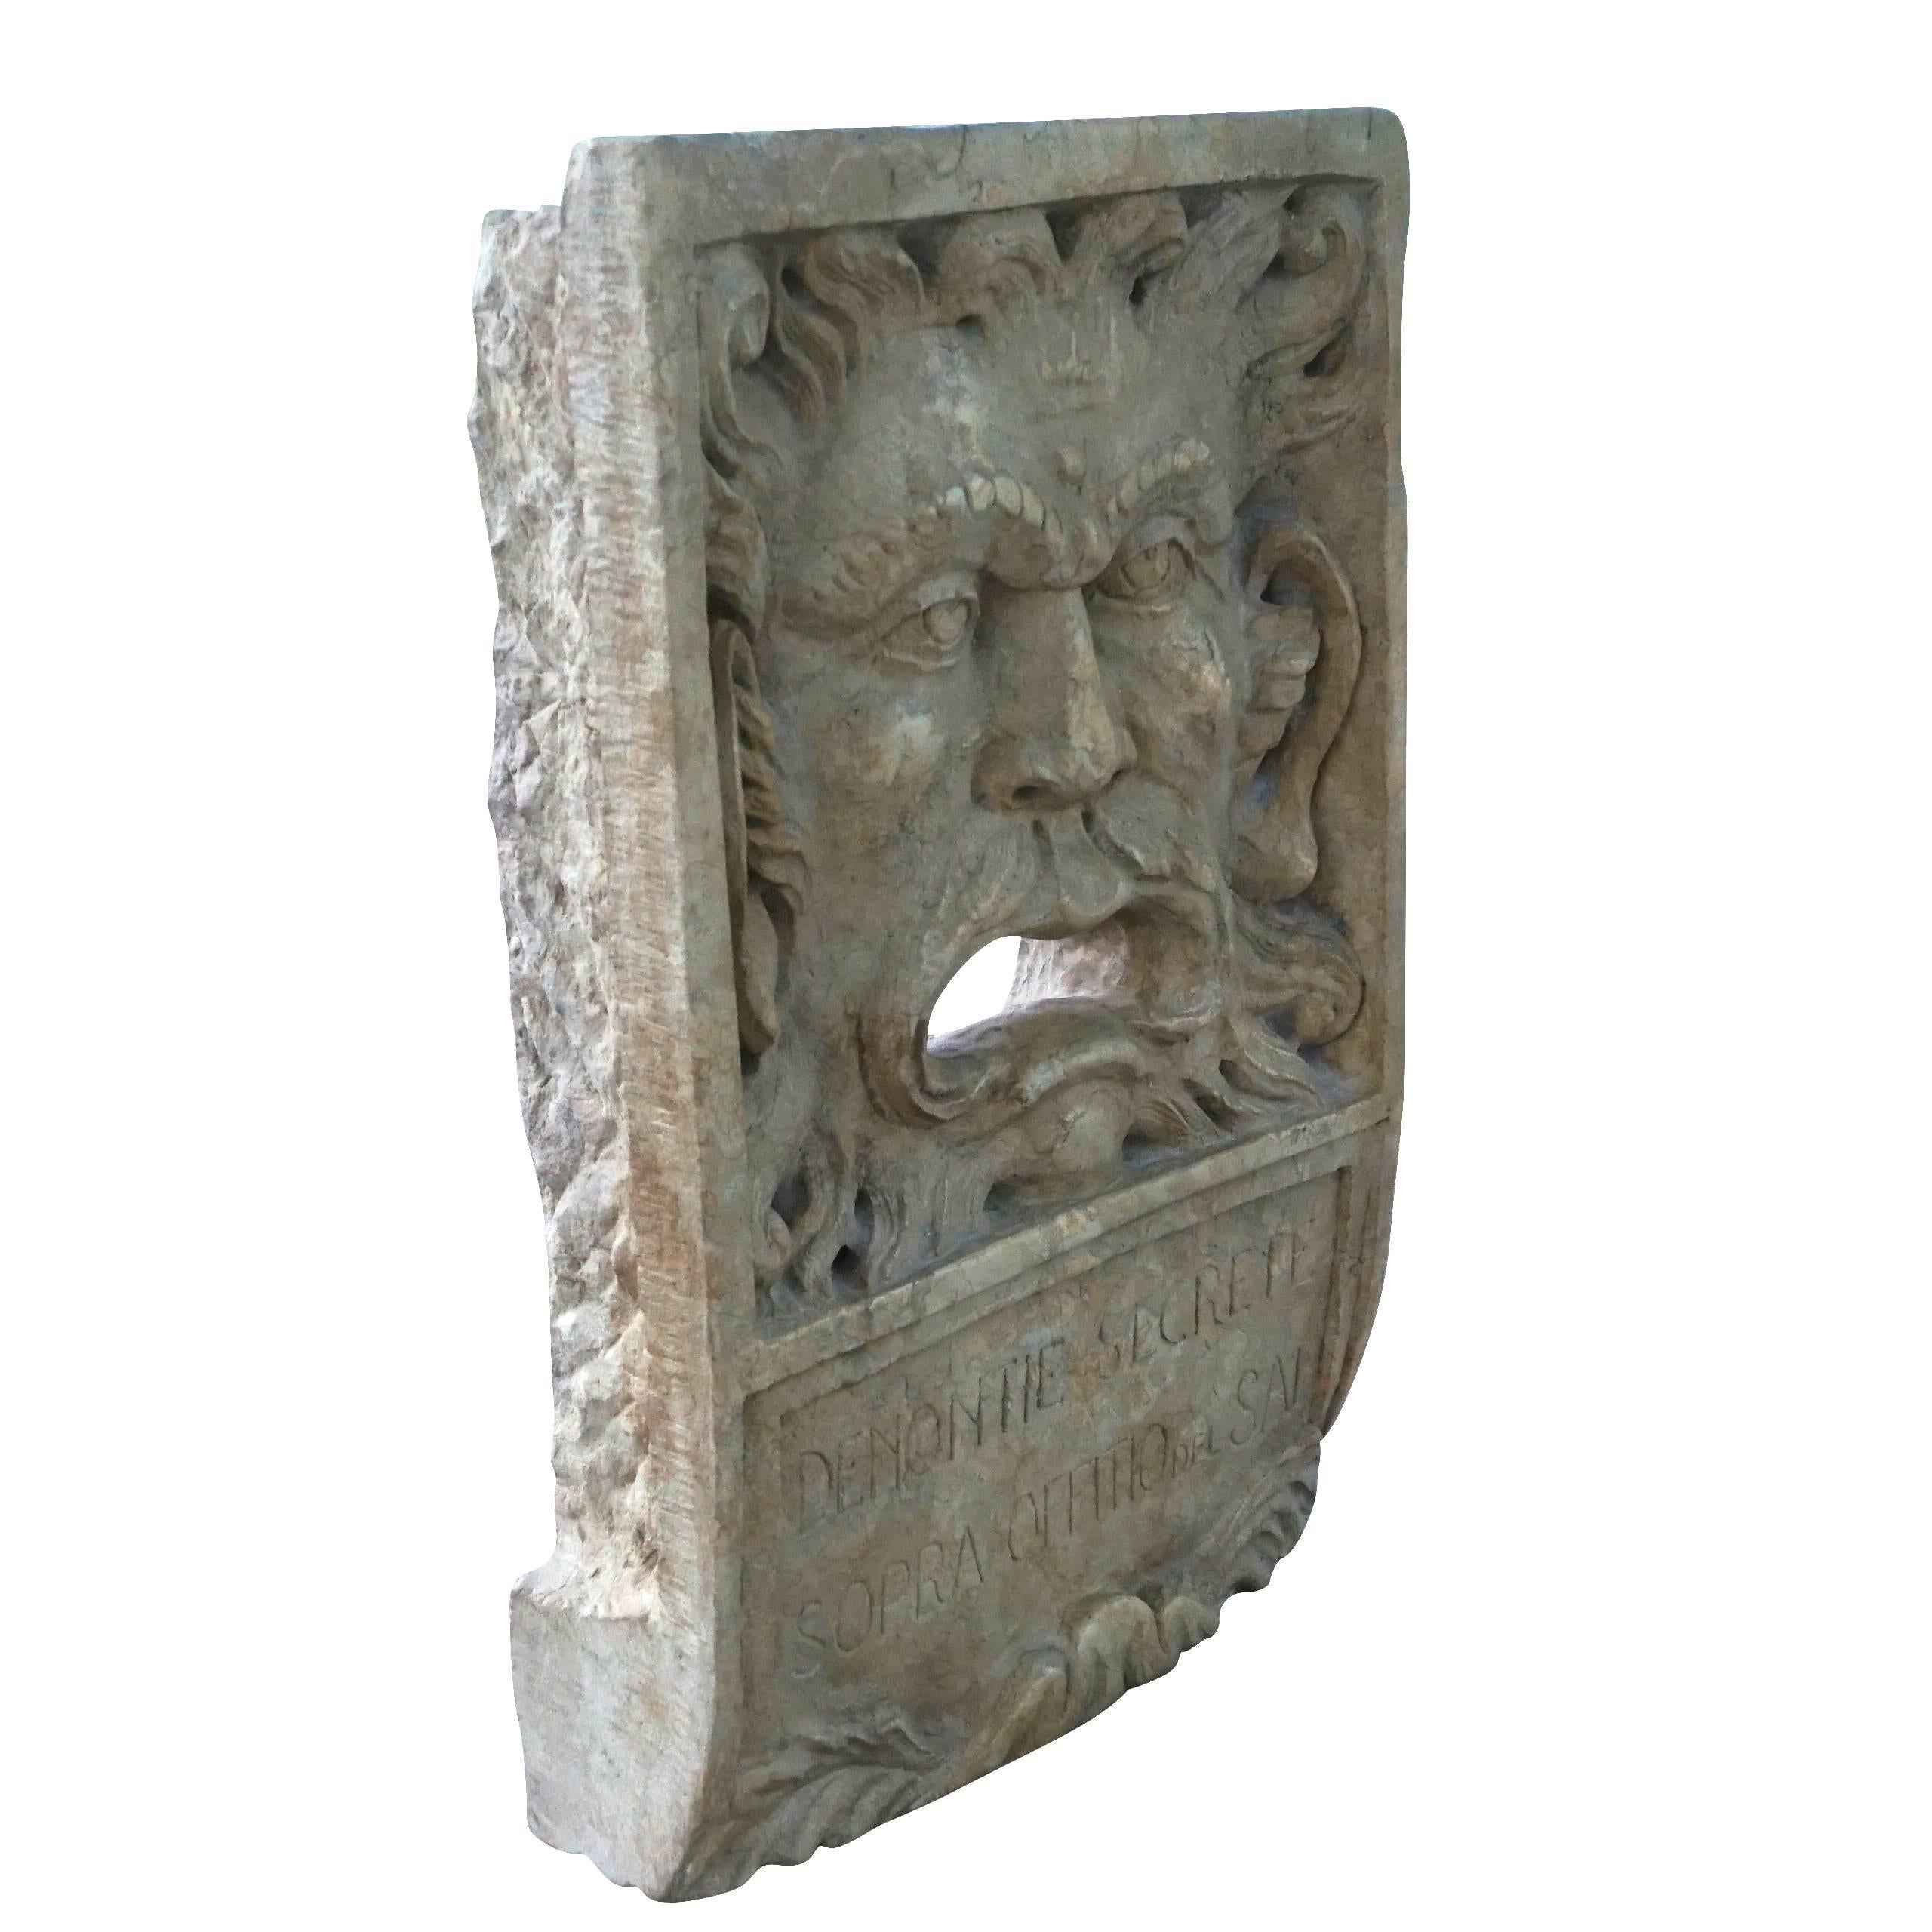 Mid-18th century, an undisclosed rectangular marble mailbox from the city of Venice scattered throughout the city of Venice particularly near and inside the Palazzo Ducale used as mailboxes in place of the mouth, the hole was used for inserting